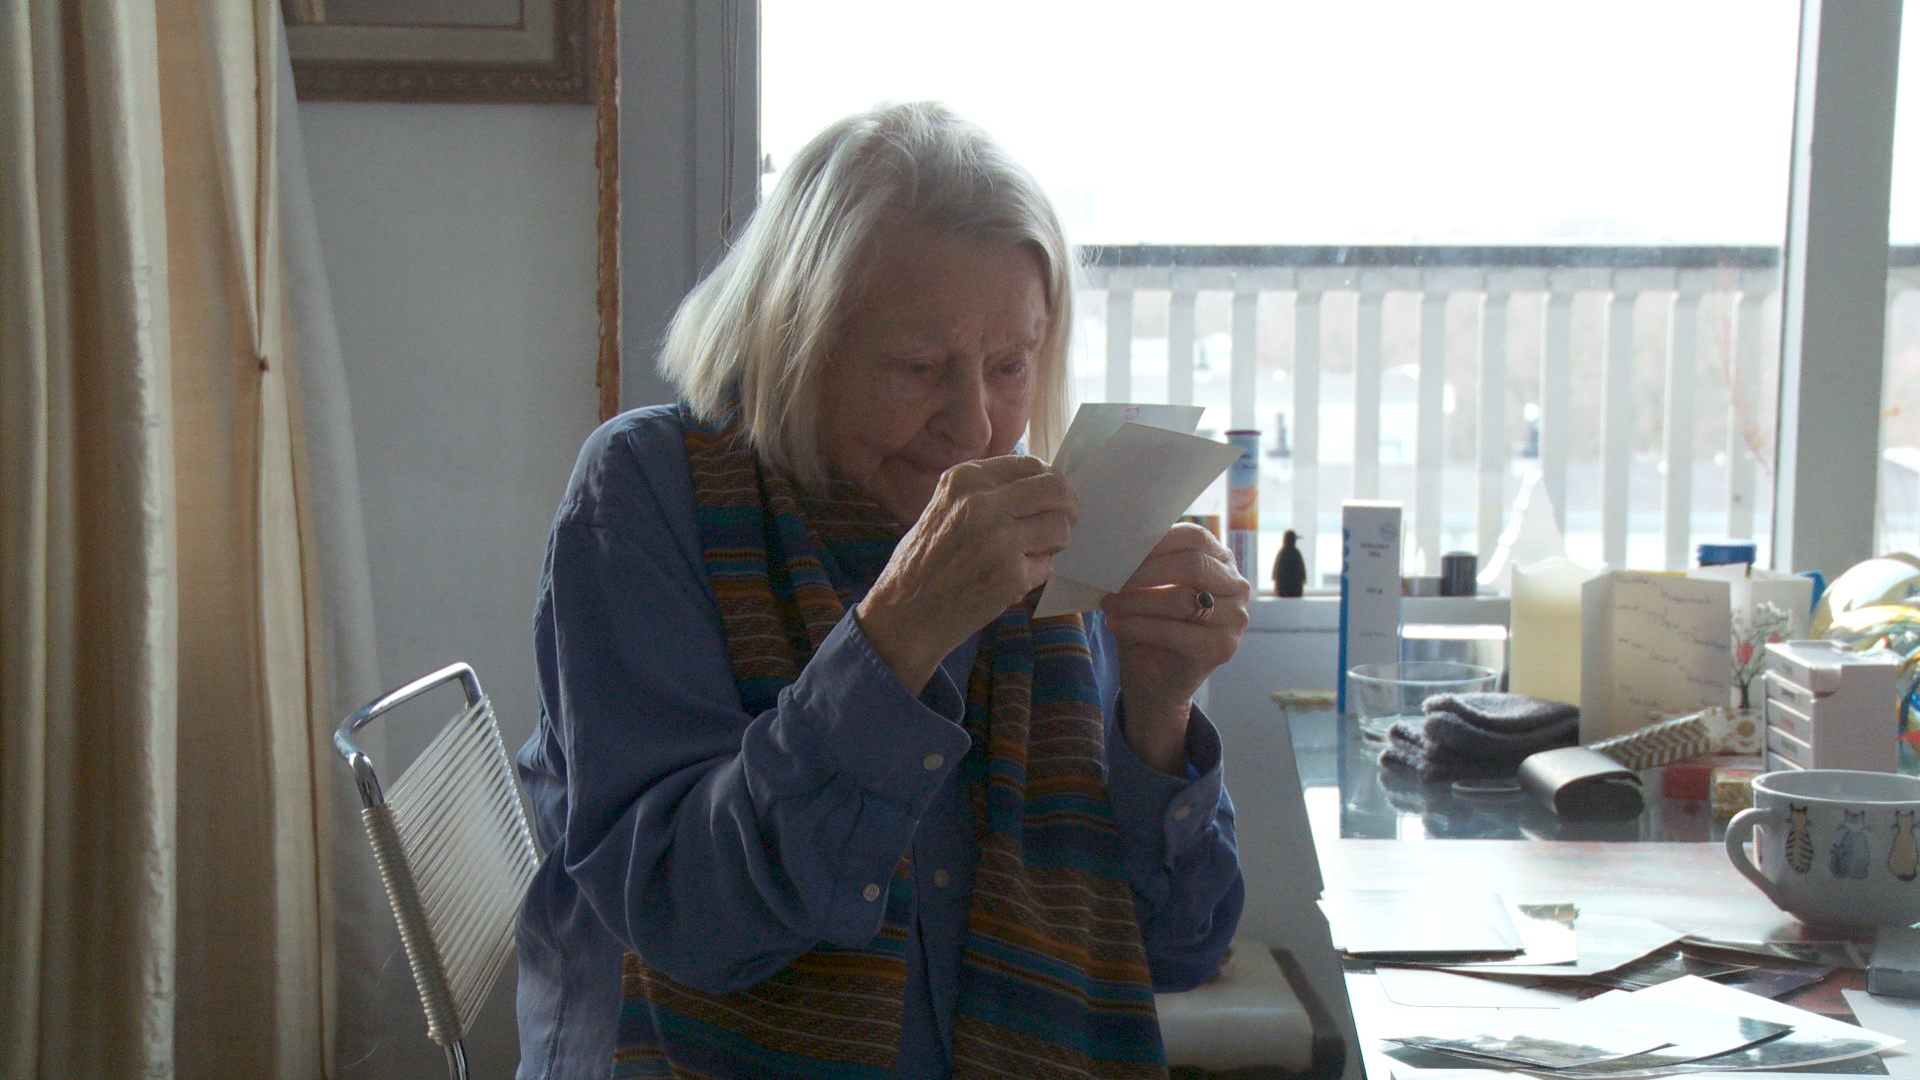 Still from the film Een klein beetje nog. Elisabeth is sitting at her dining table looking at old pictures.